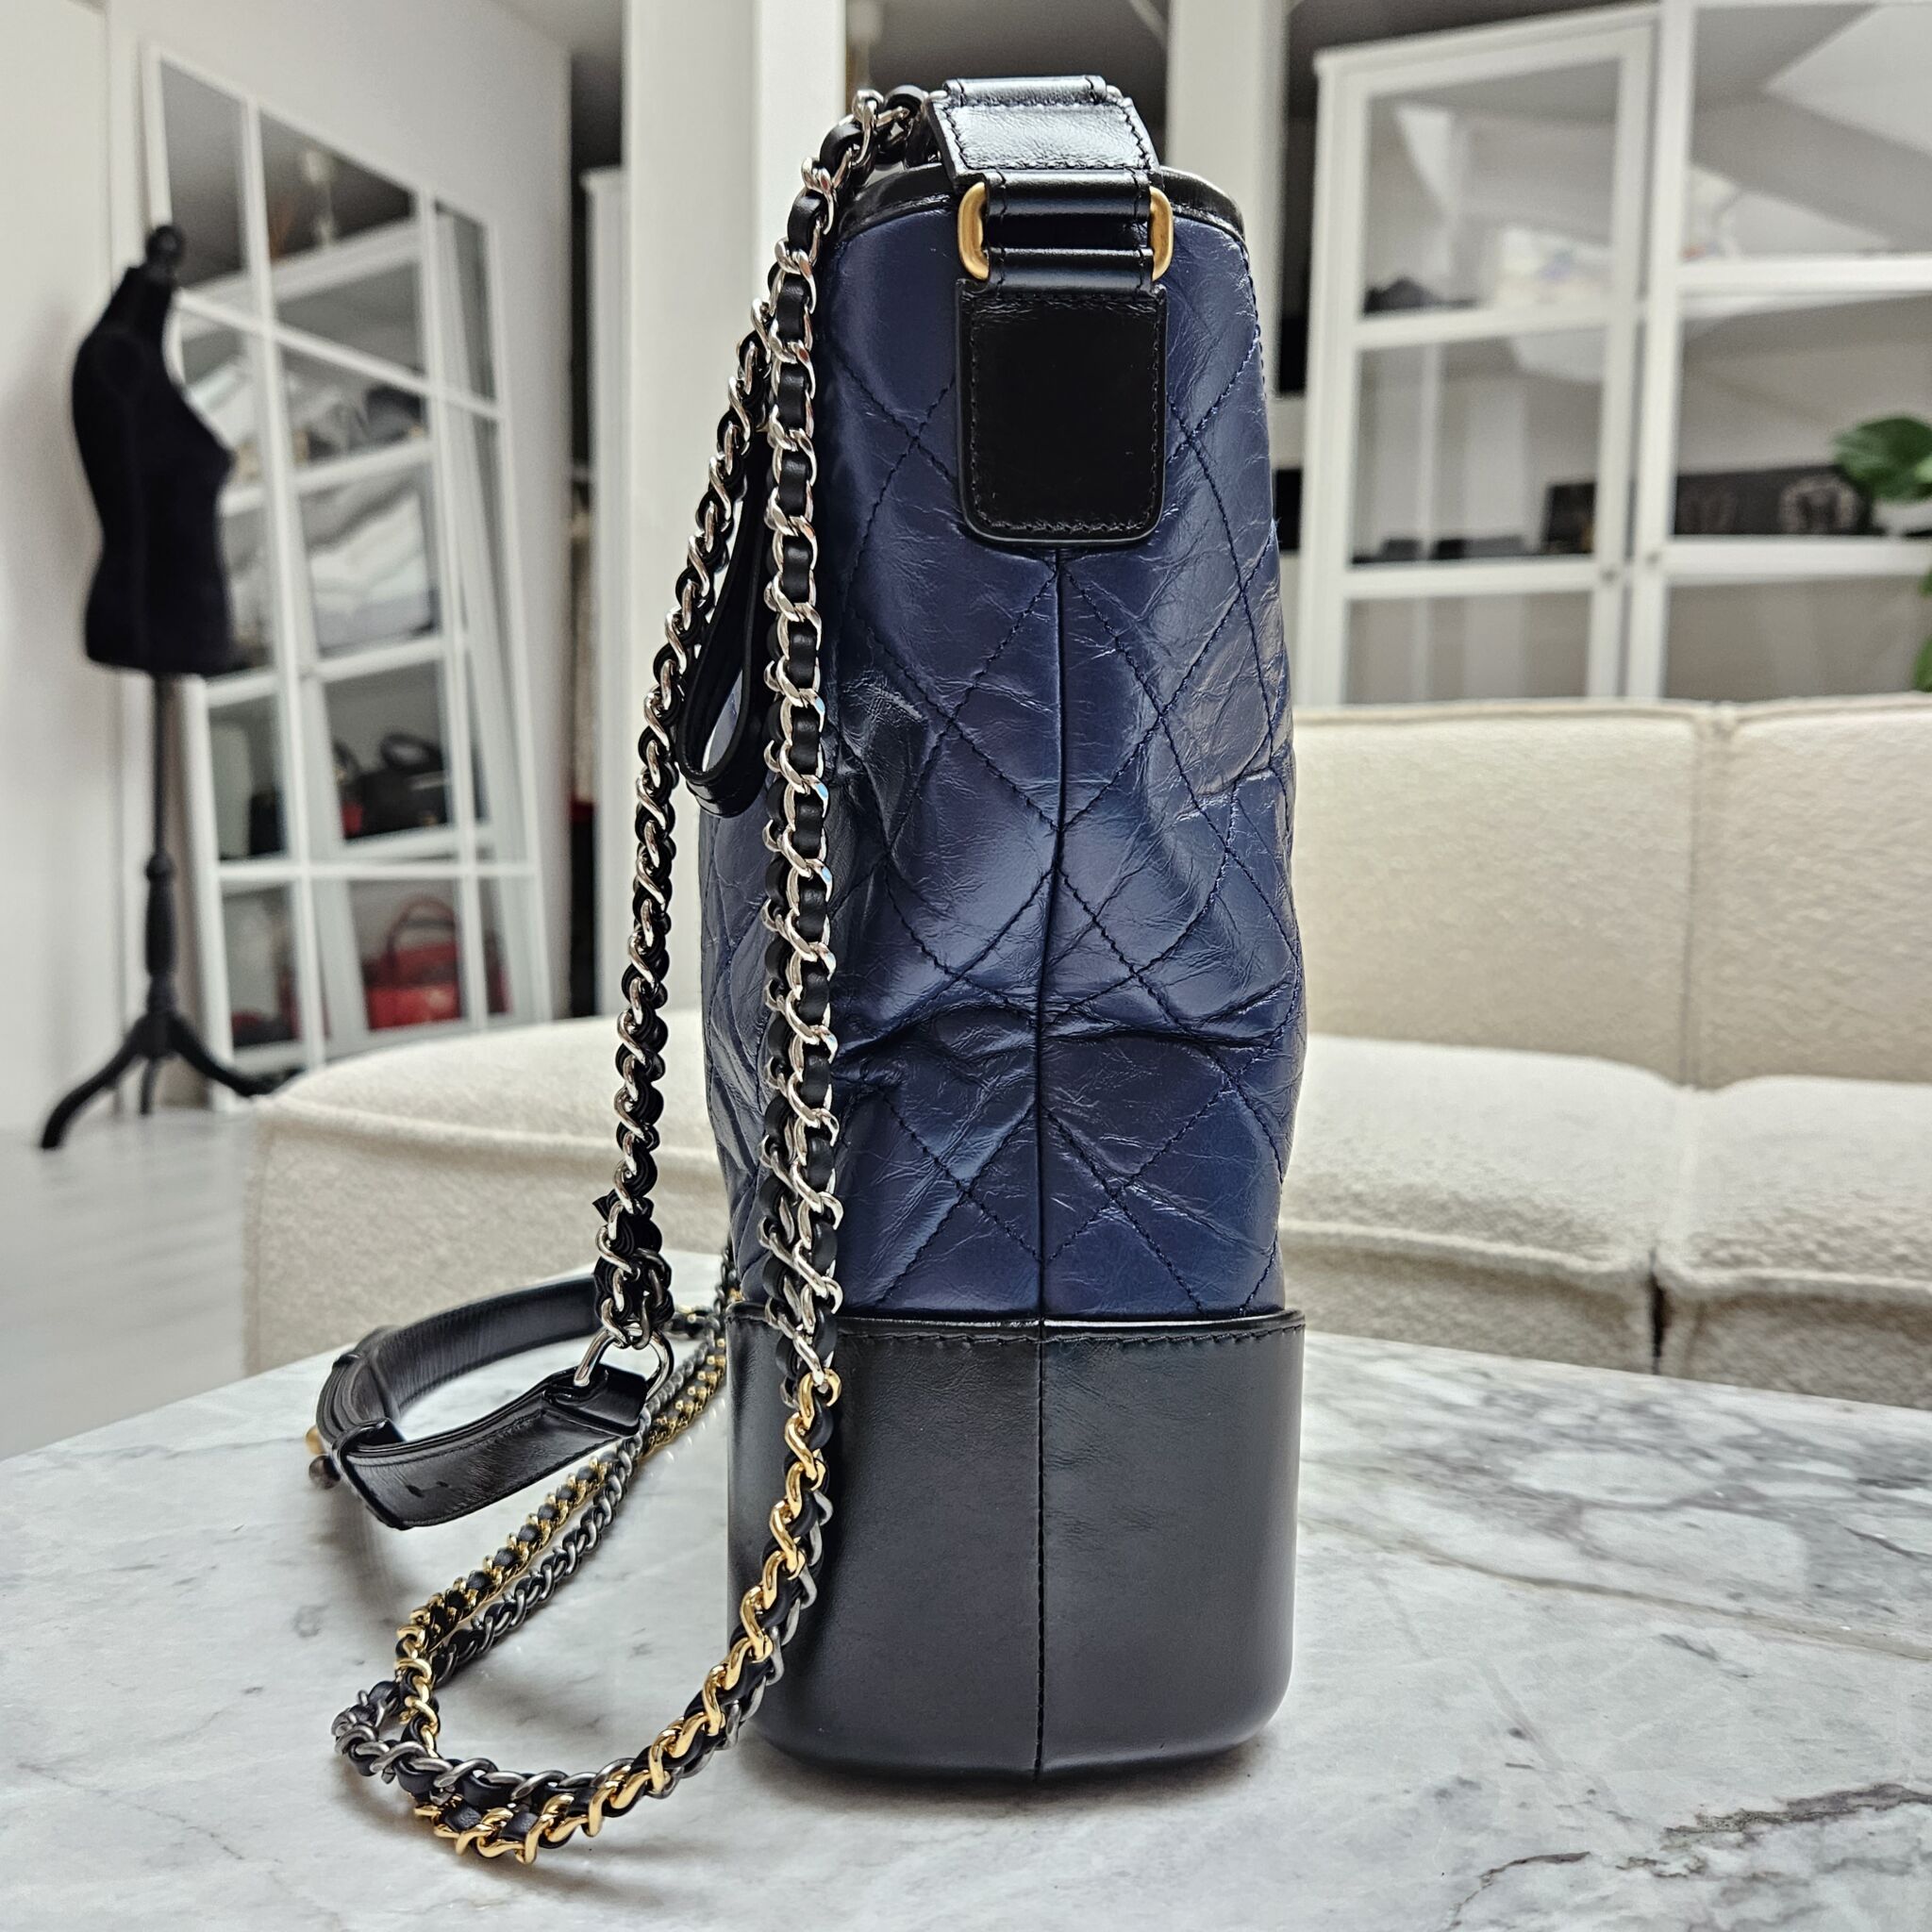 Chanel Large Gabrielle Hobo, Distressed leather, Blue/Black